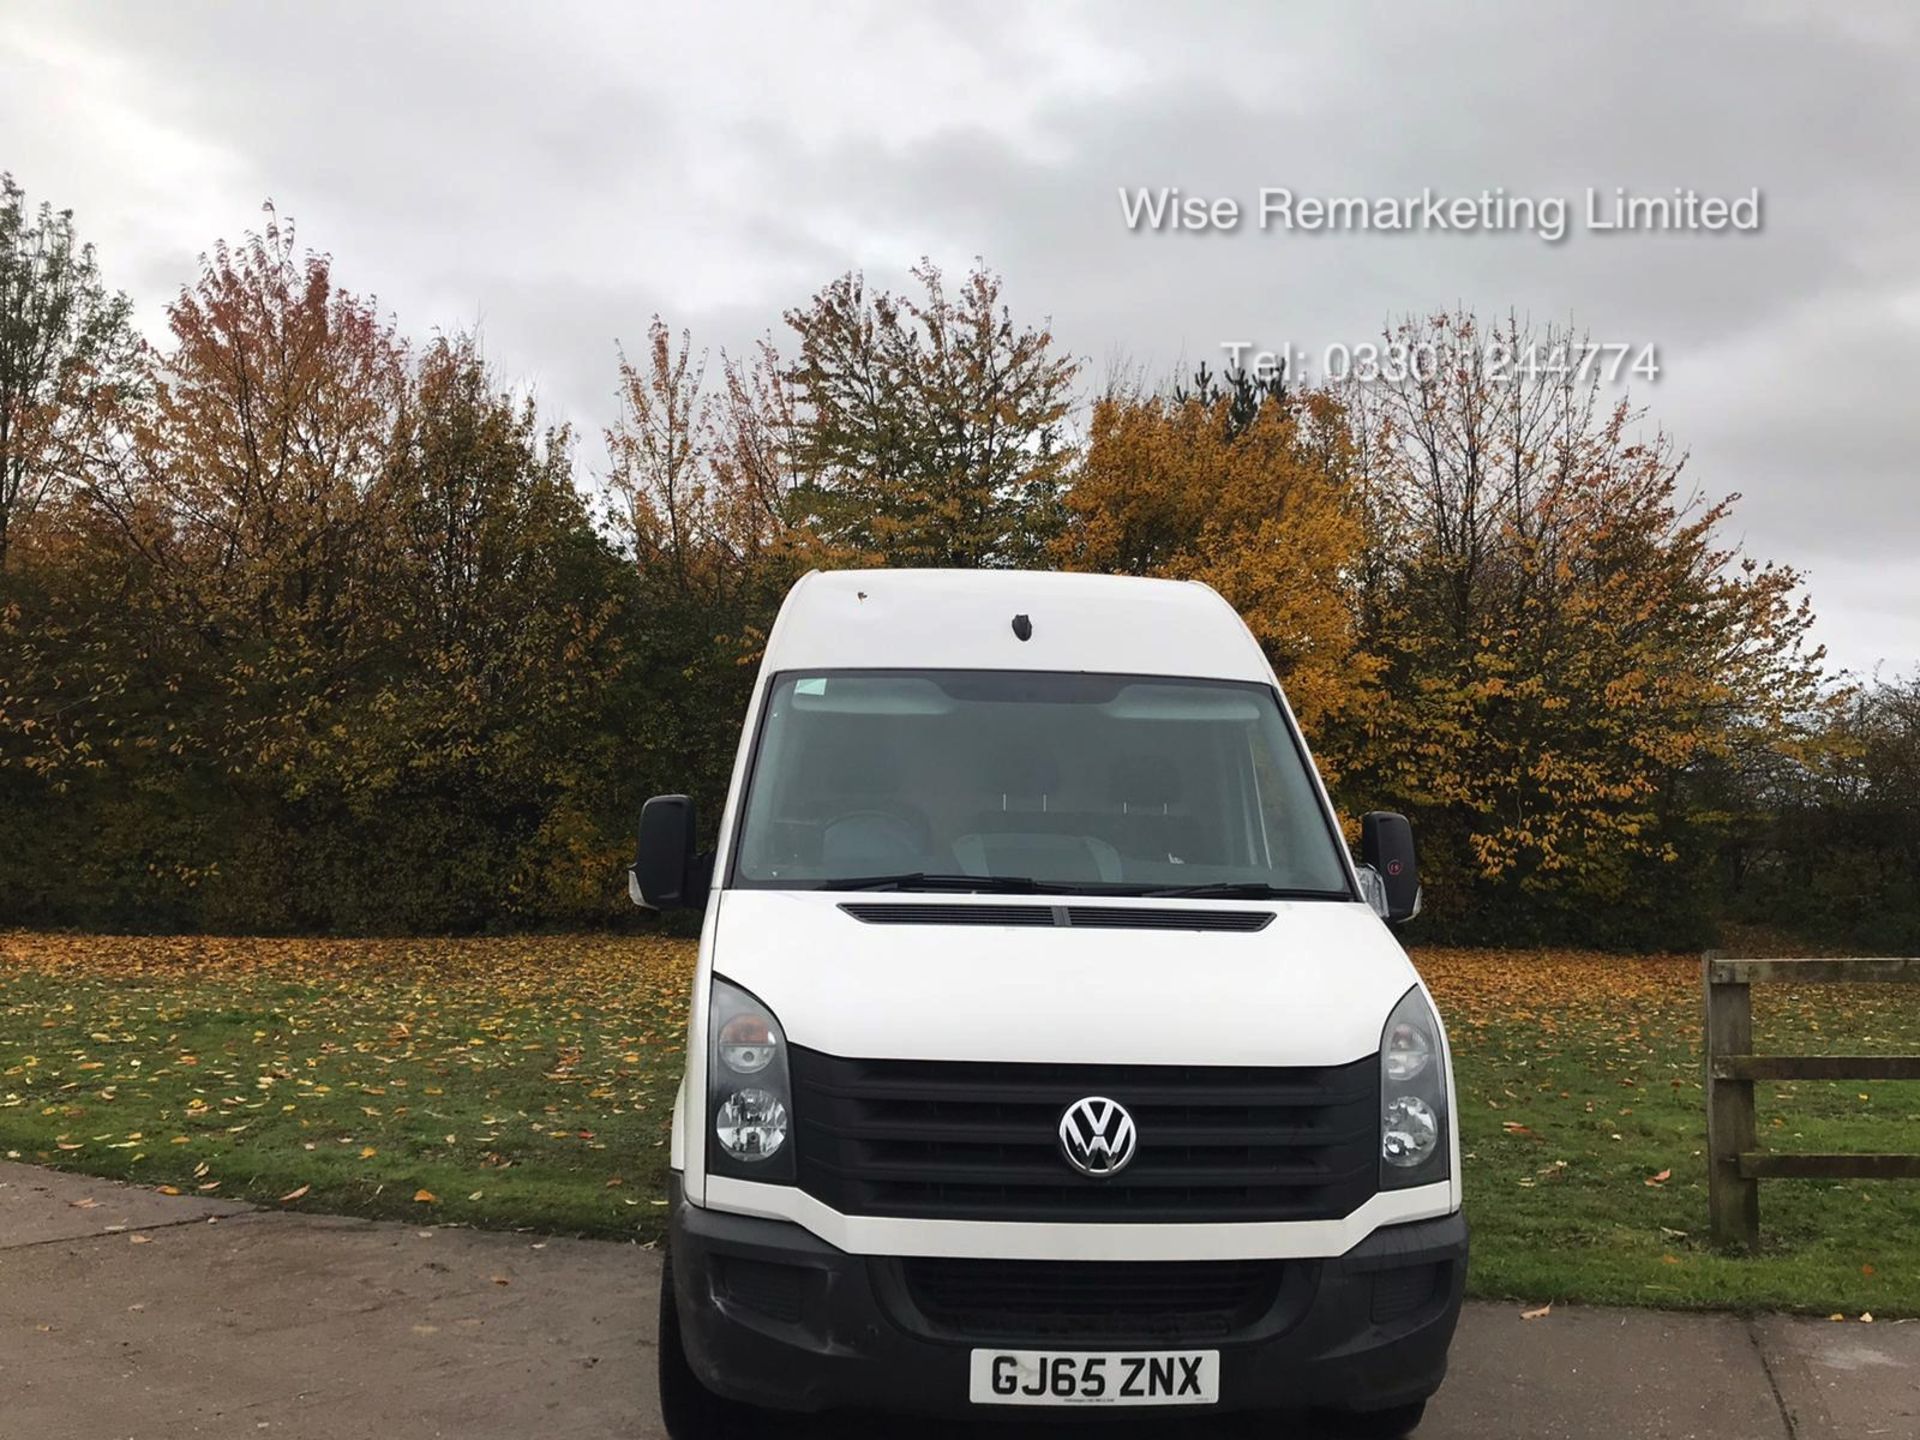 Volkswagen Crafter CR35 Startline 2.0l TDi - LWB - 2016 Model -1 Keeper From New - Service History - Image 4 of 15